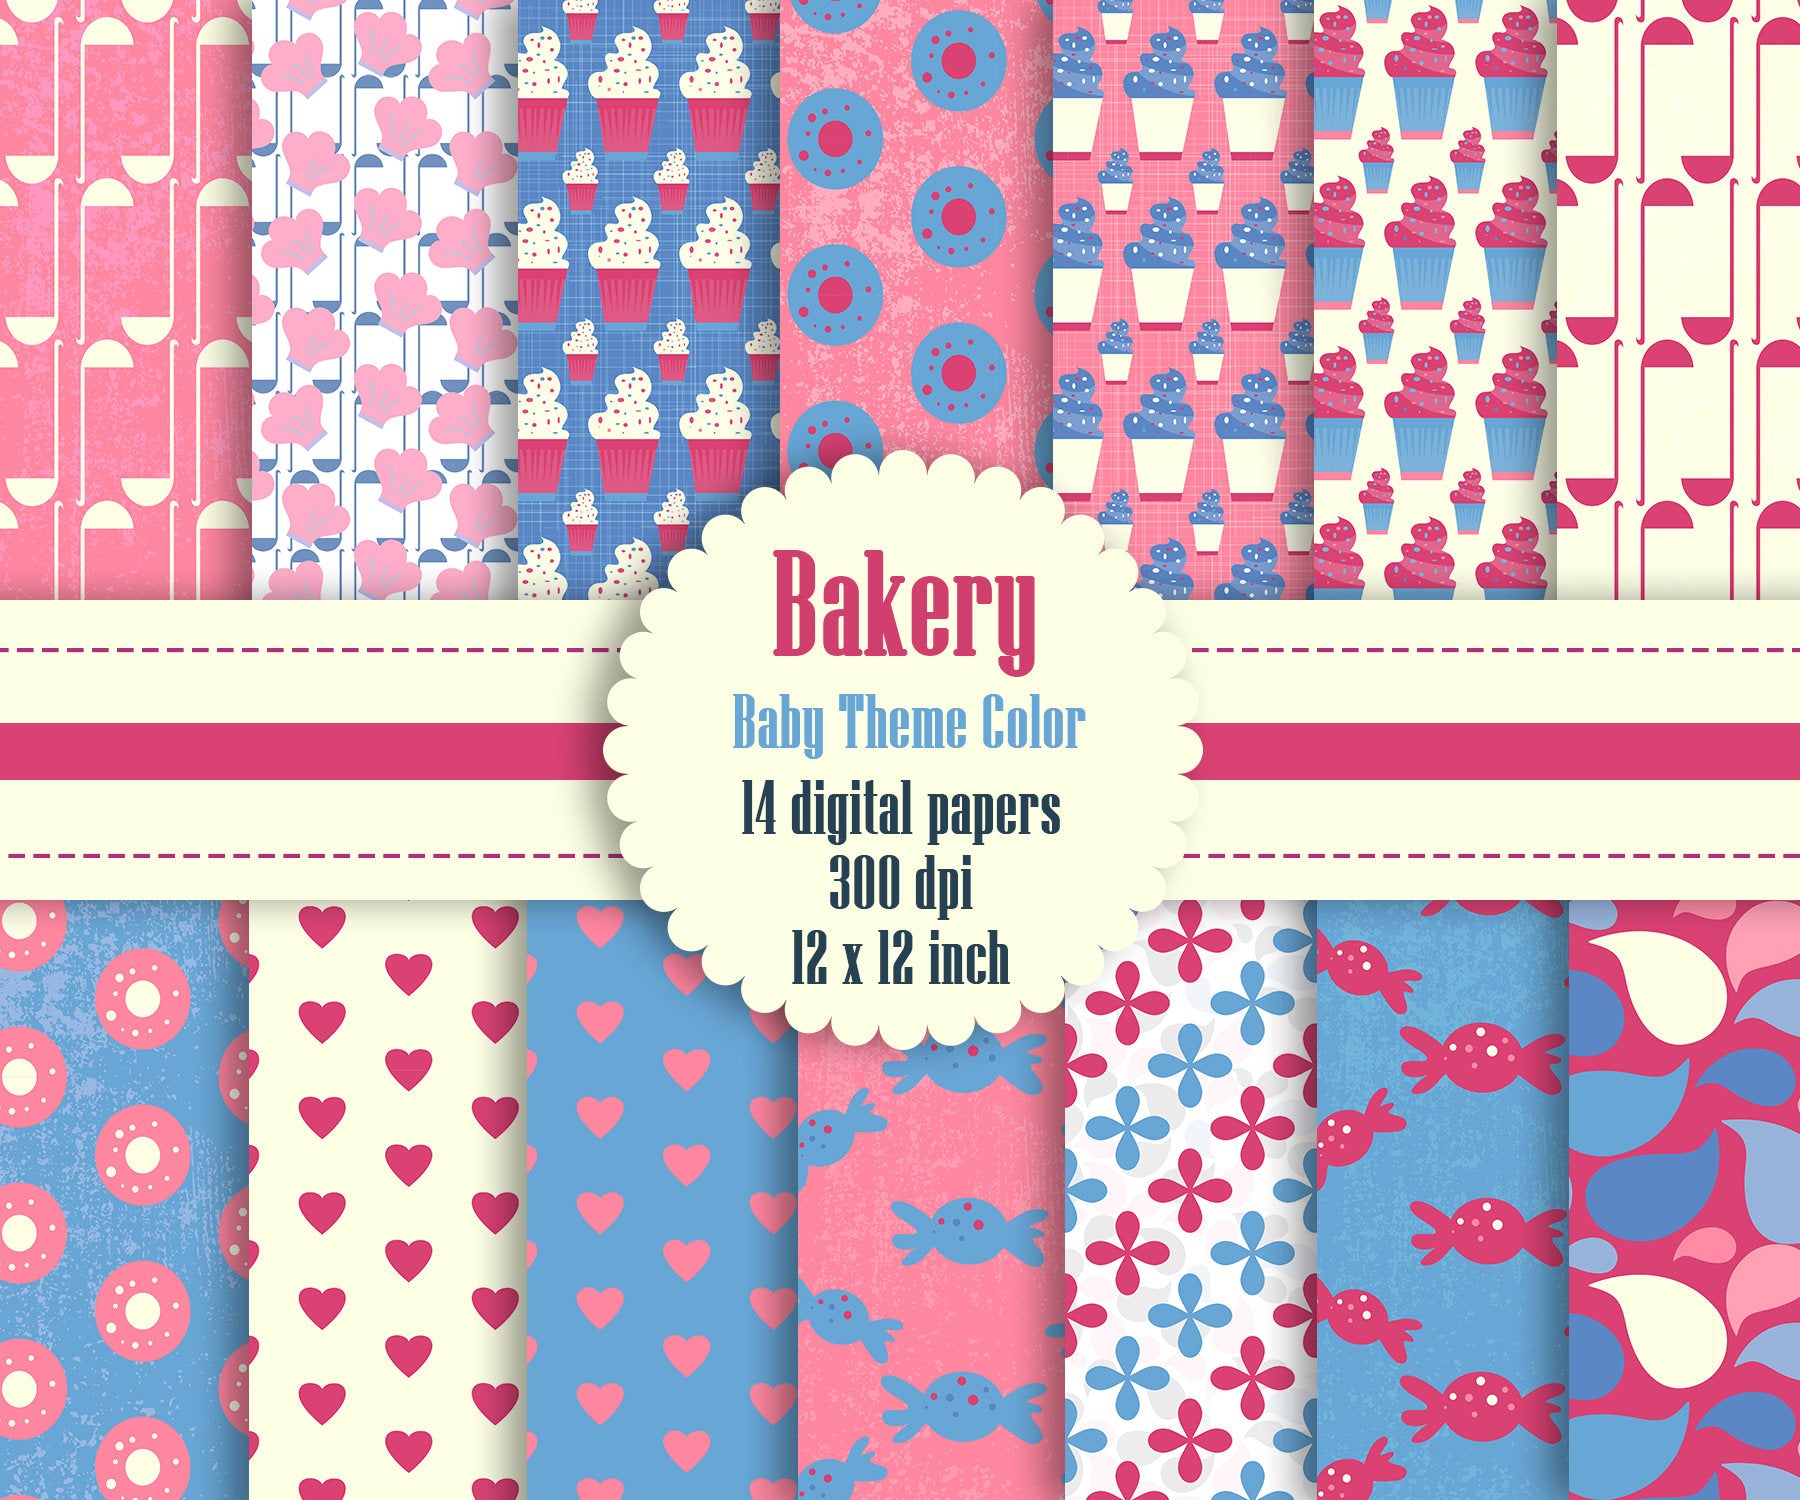 14 Bakery Digital Papers in Baby Theme Color in 12 inch, Instant Download, High Resolution 300 Dpi, Commercial Use